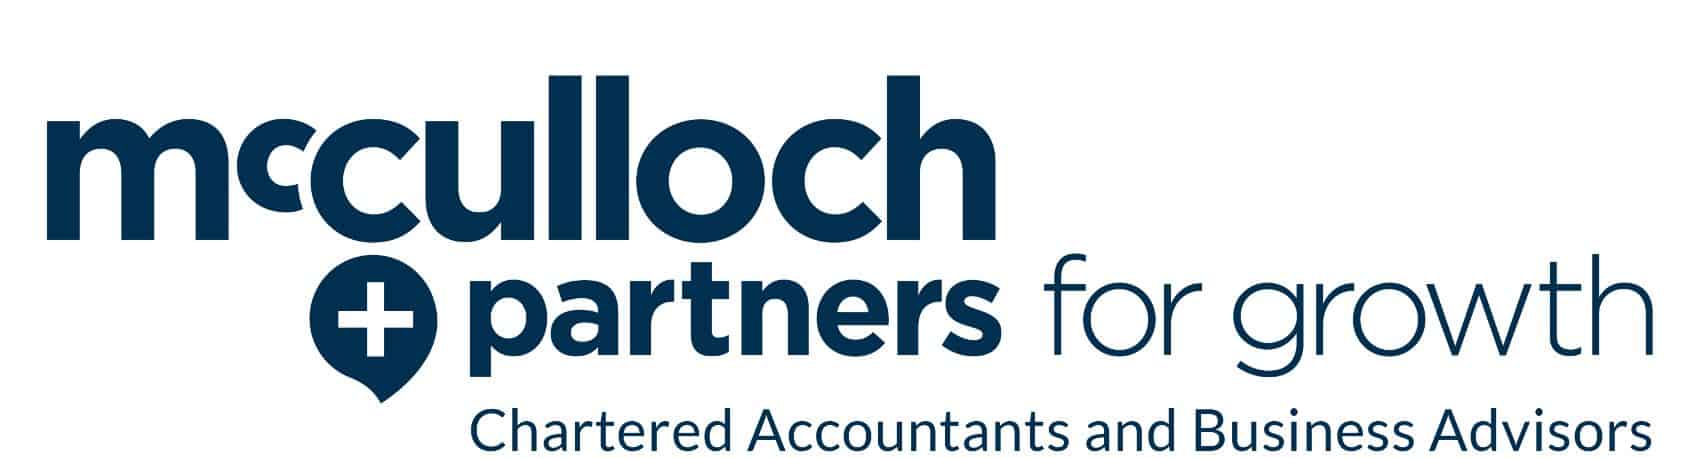 MCP Logo — McCulloch & Partners Chartered Accountants and Business Advisors in New Zealand